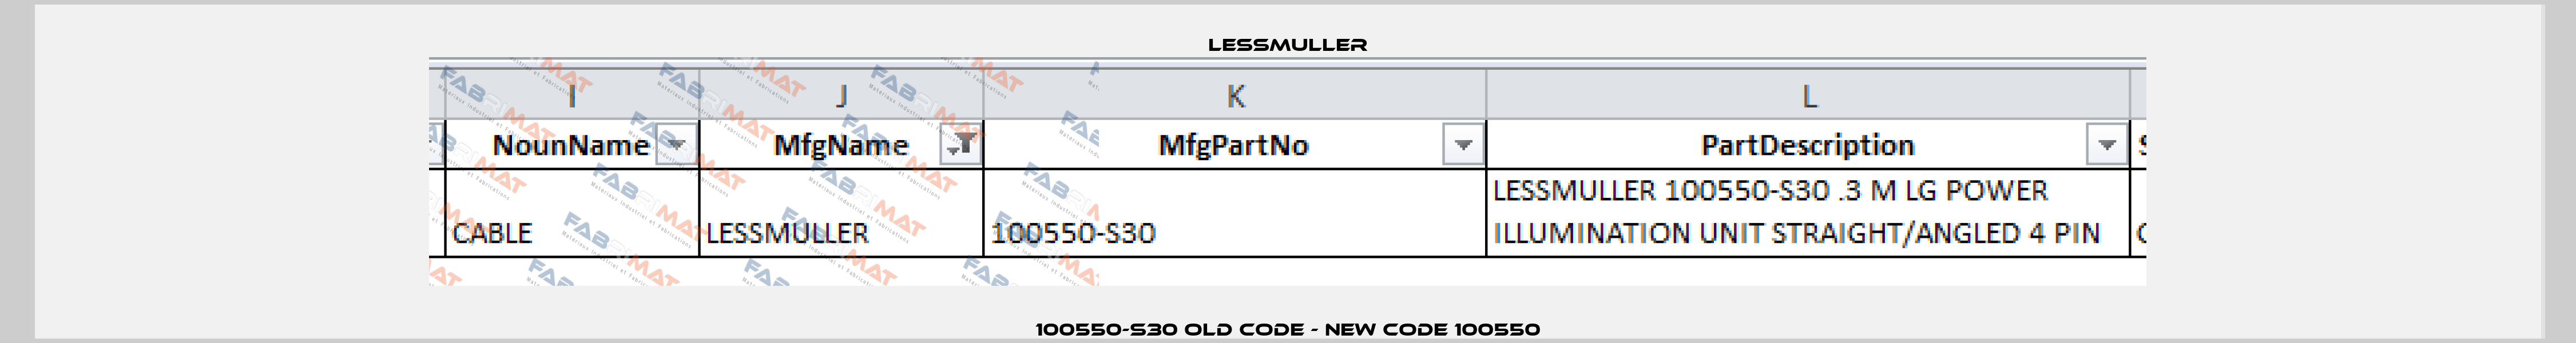 100550-S30 old code - new code 100550 LESSMULLER